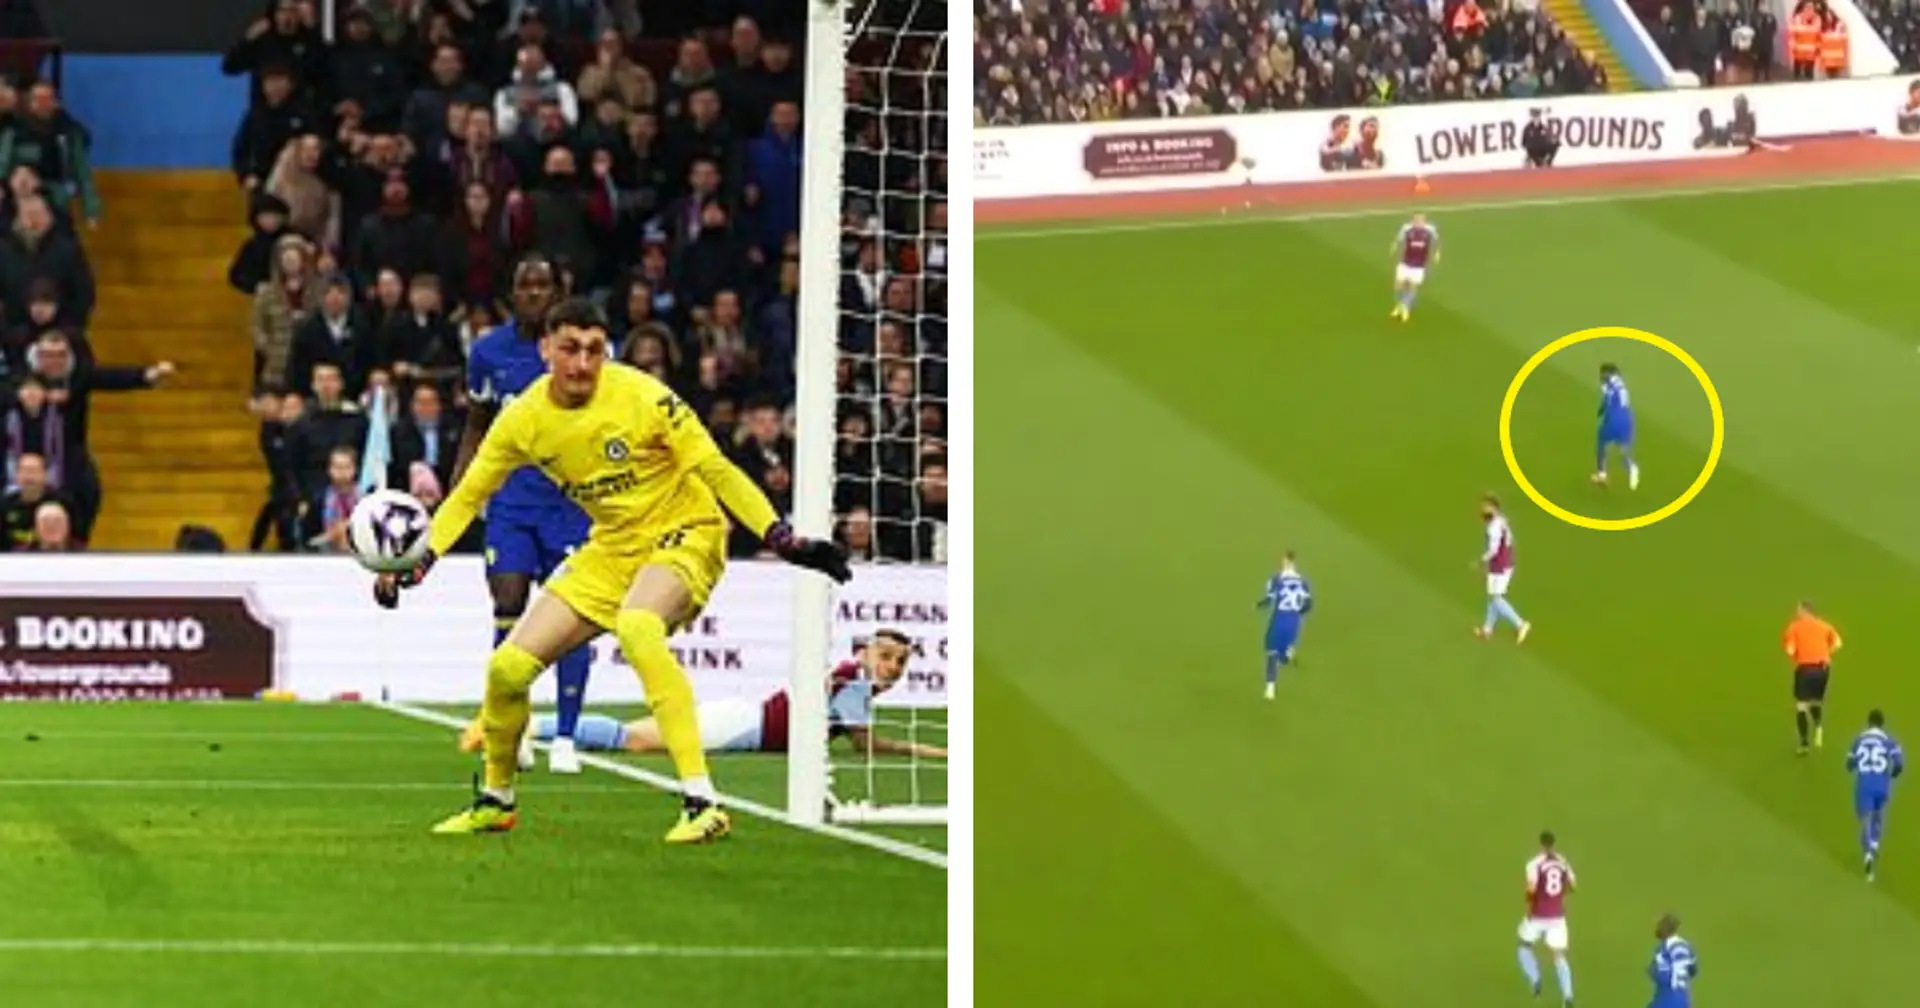 'Fire him into loan army': some Chelsea fans are done with one player — he might be to blame for first Villa goal